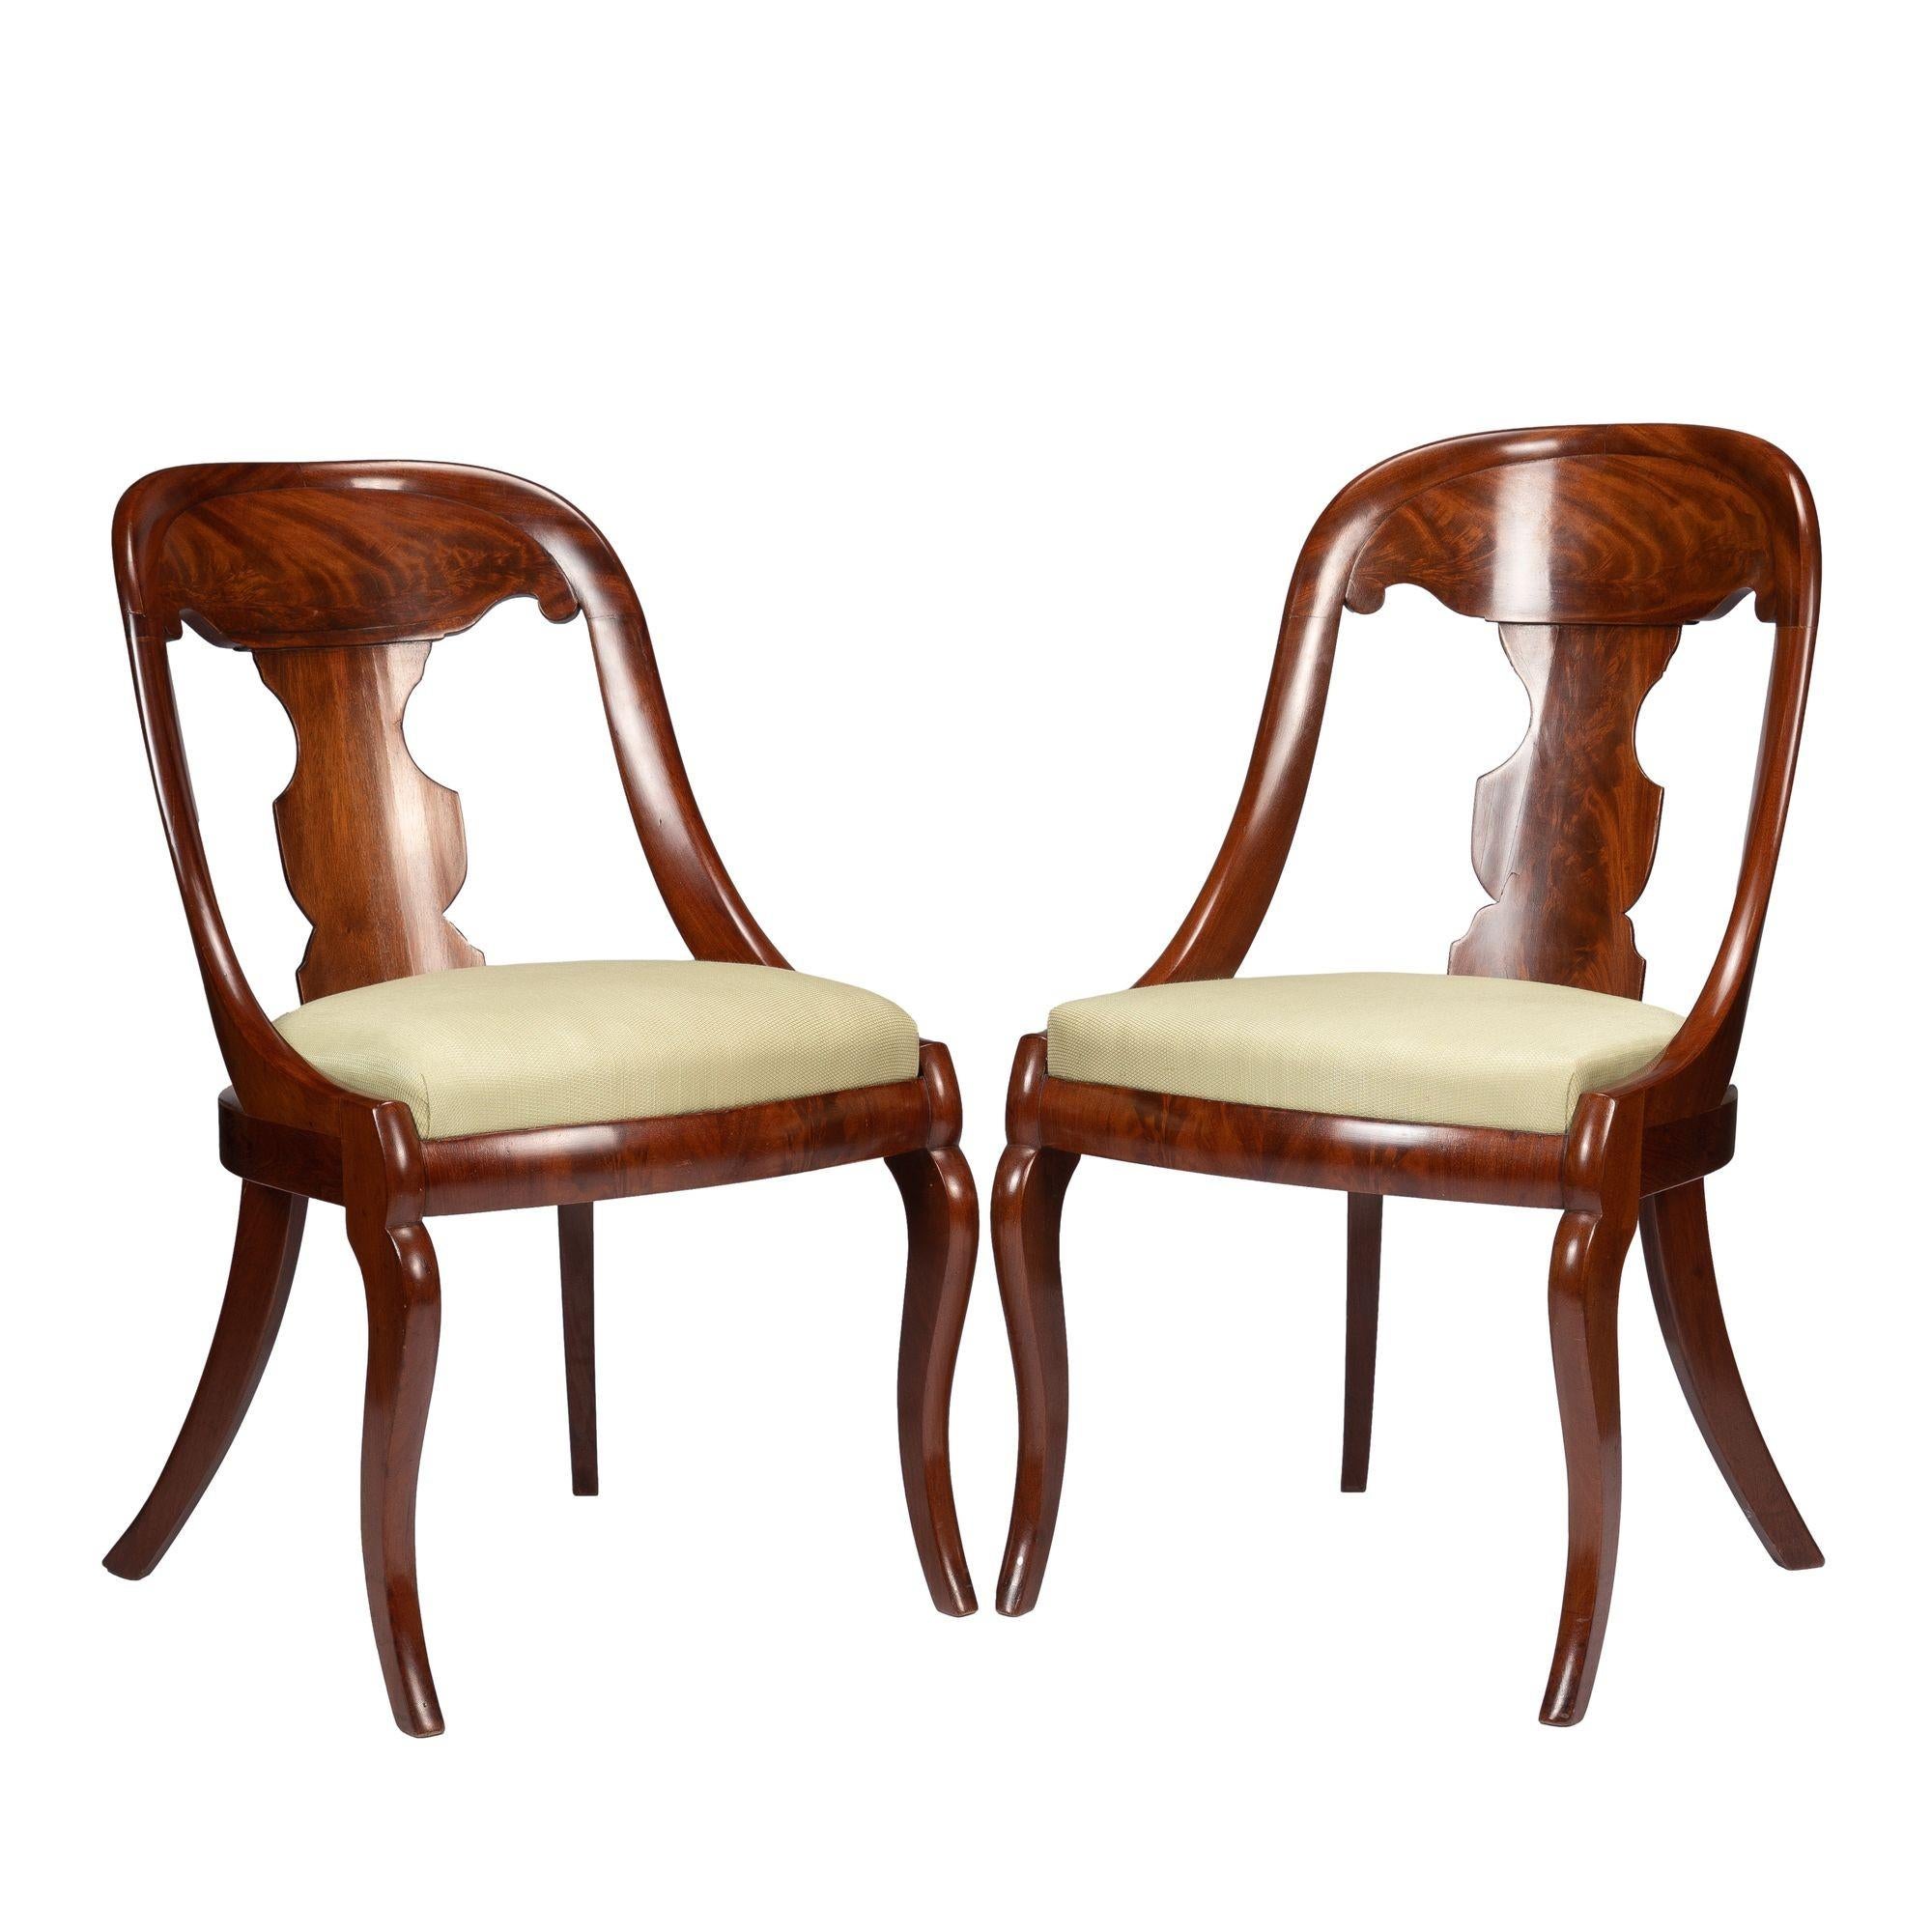 Pair of American Mahogany Gondola Chairs, 1815-35 For Sale 6